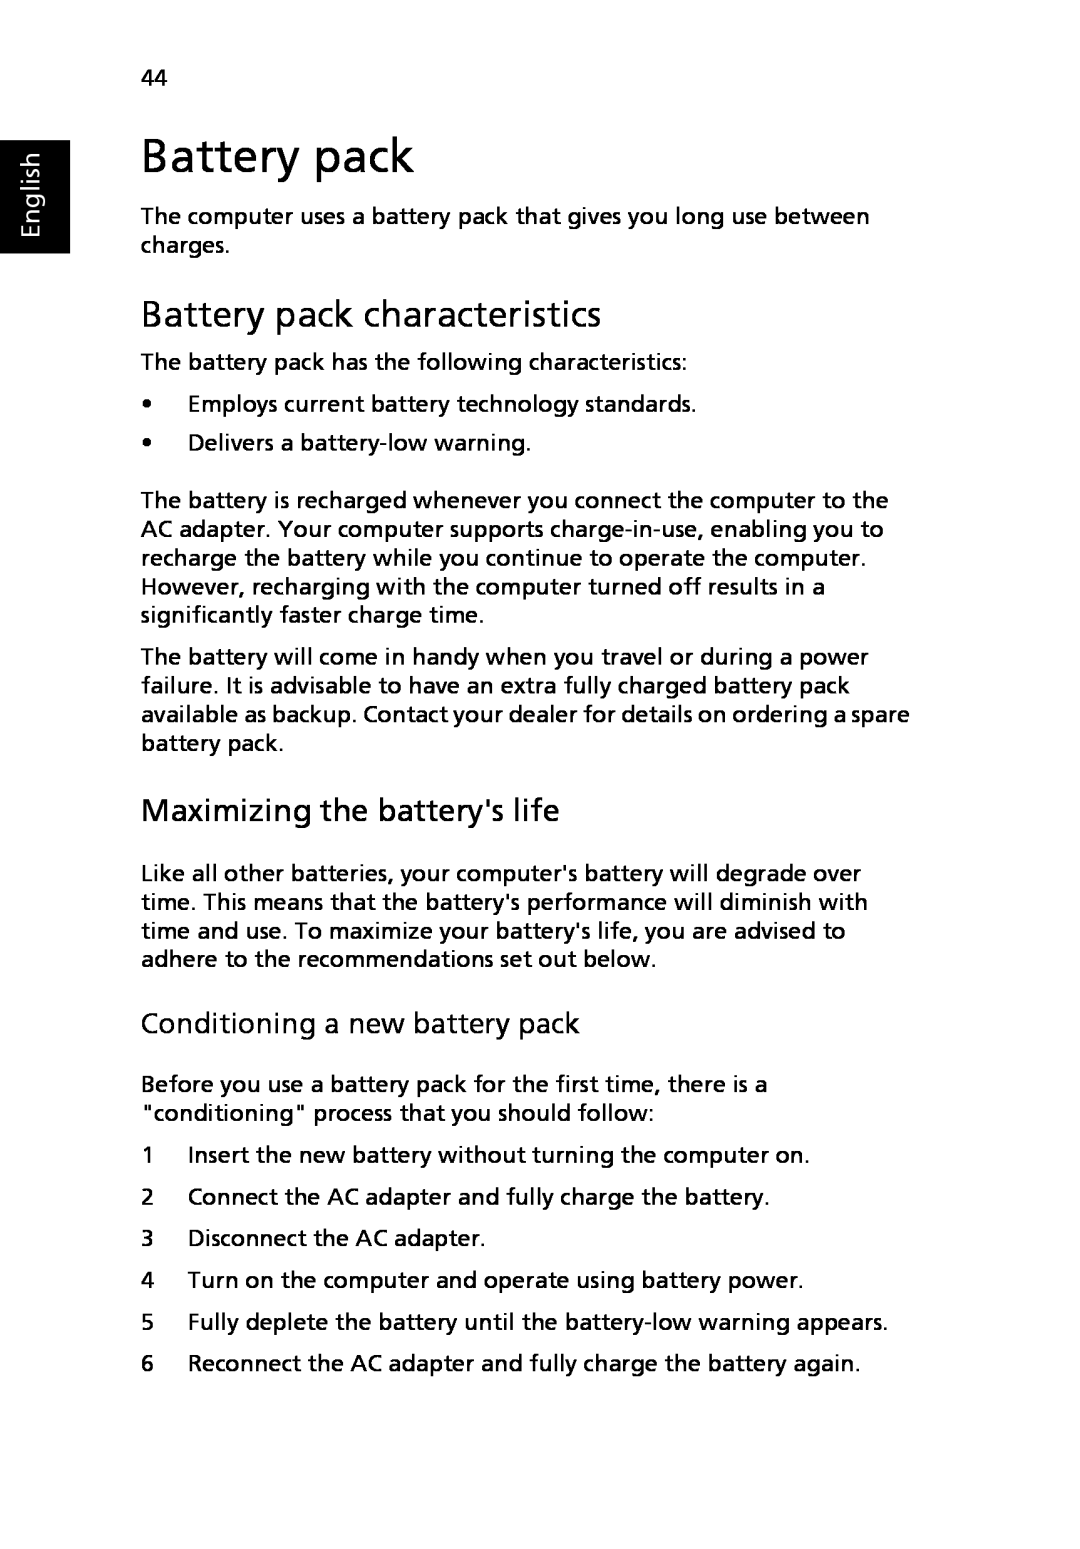 Acer 4920, MS2219 Battery pack characteristics, Maximizing the batterys life, Conditioning a new battery pack, English 